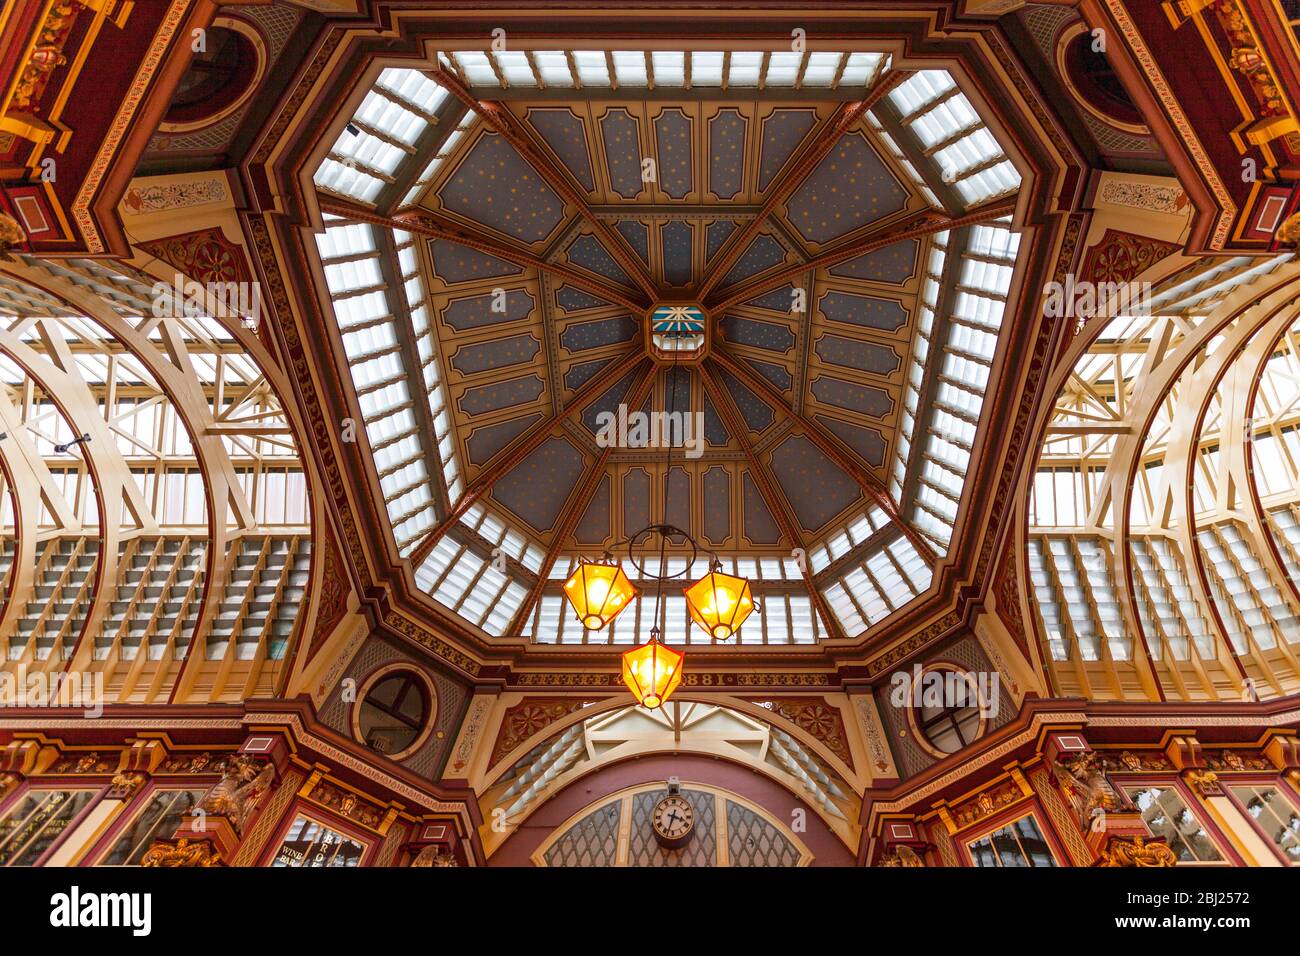 The ornate ceiling of the centre of Victorian Leadenhall Market designed by Sir Horace Jones , London, England Stock Photo